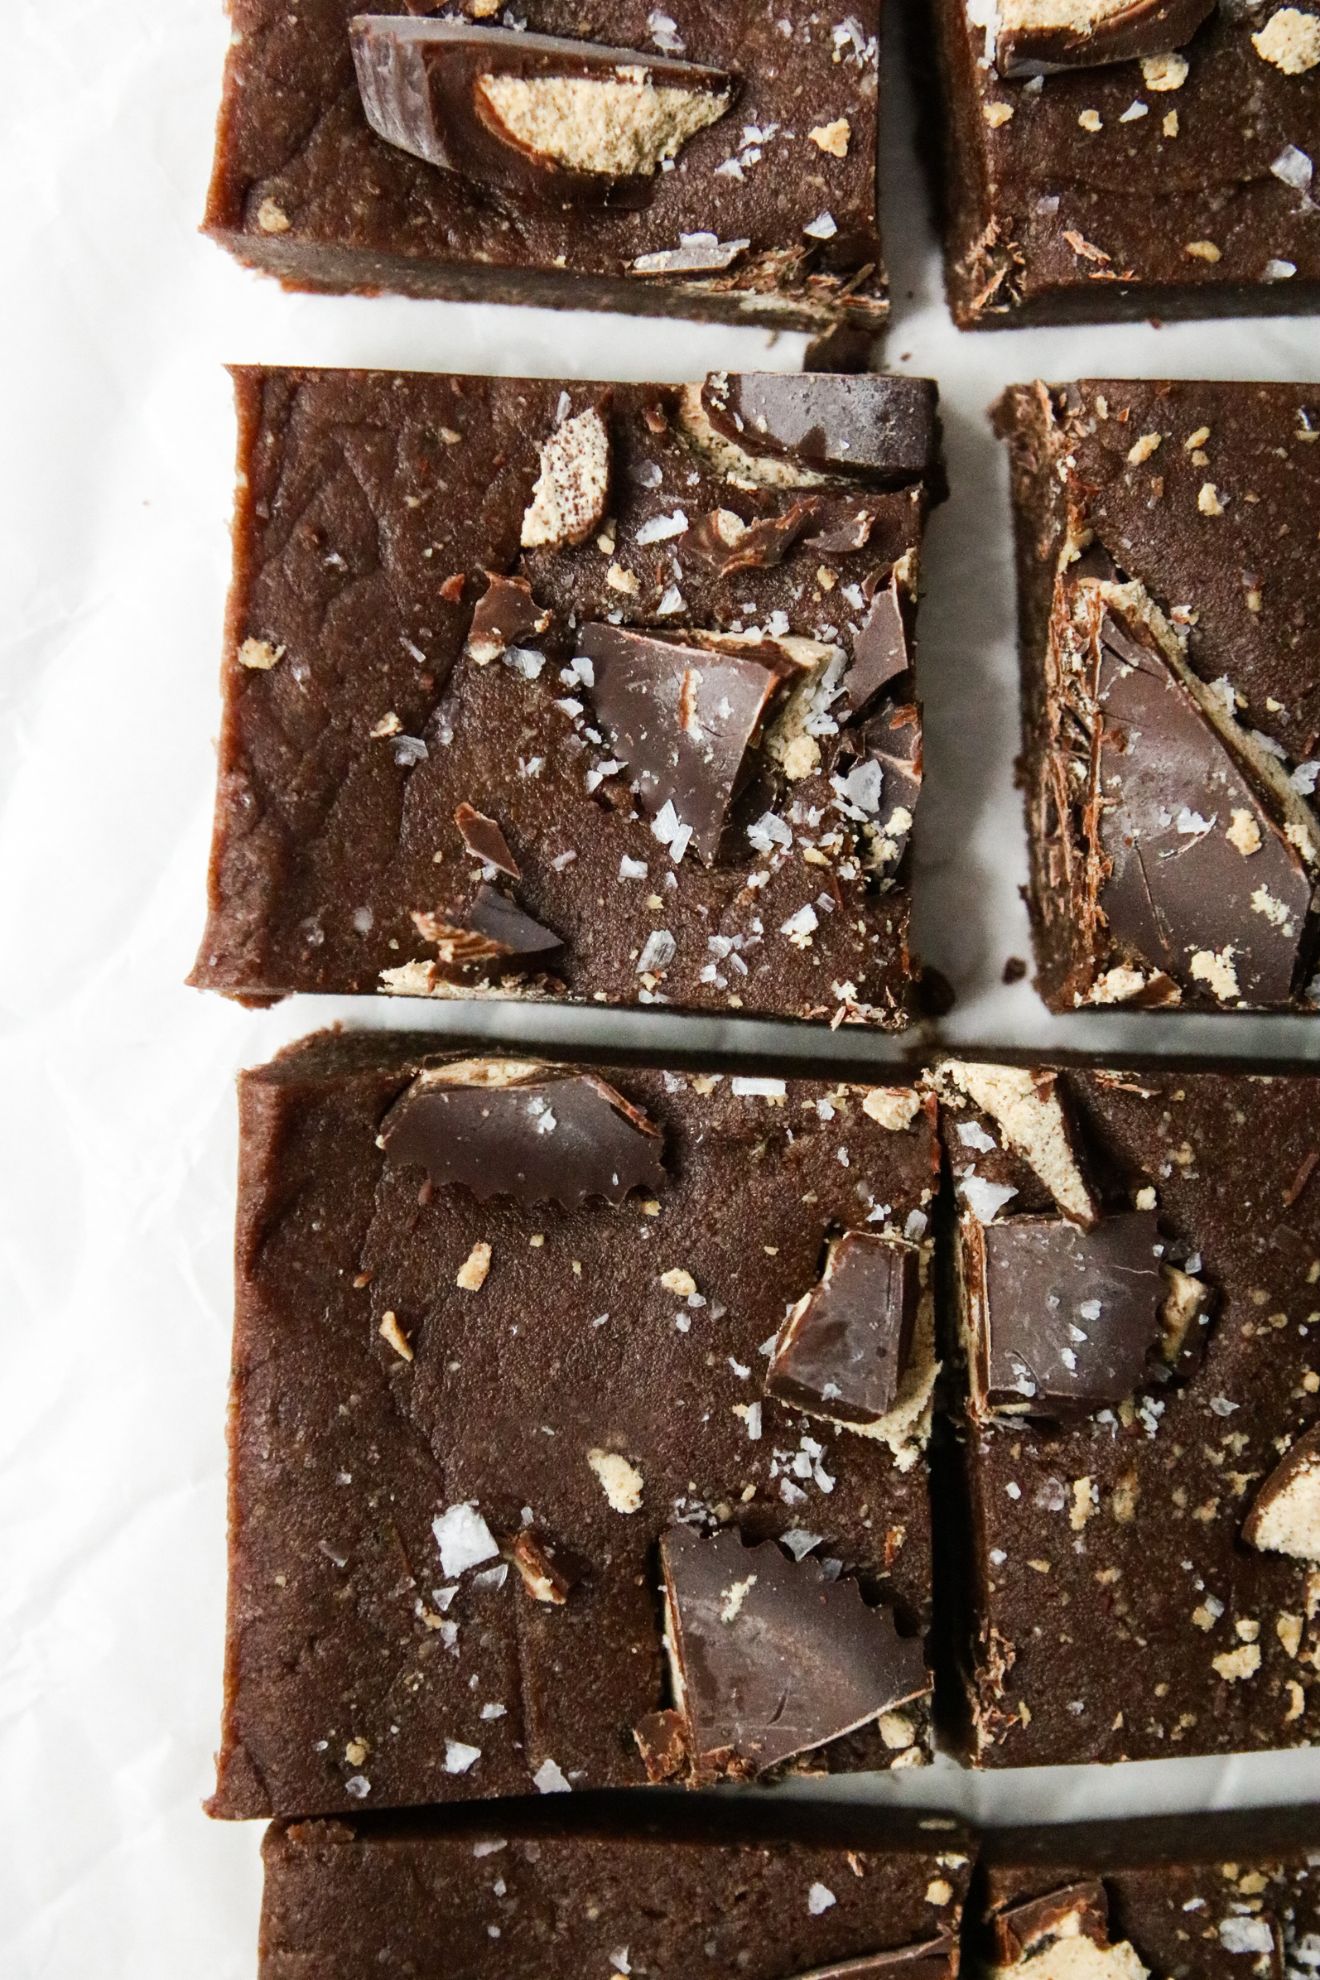 This is an overhead image of brownies cut into squares. The brownies are topped with cut up peanut butter cups and flakey salt. The brownies are on a white piece of parchment paper.